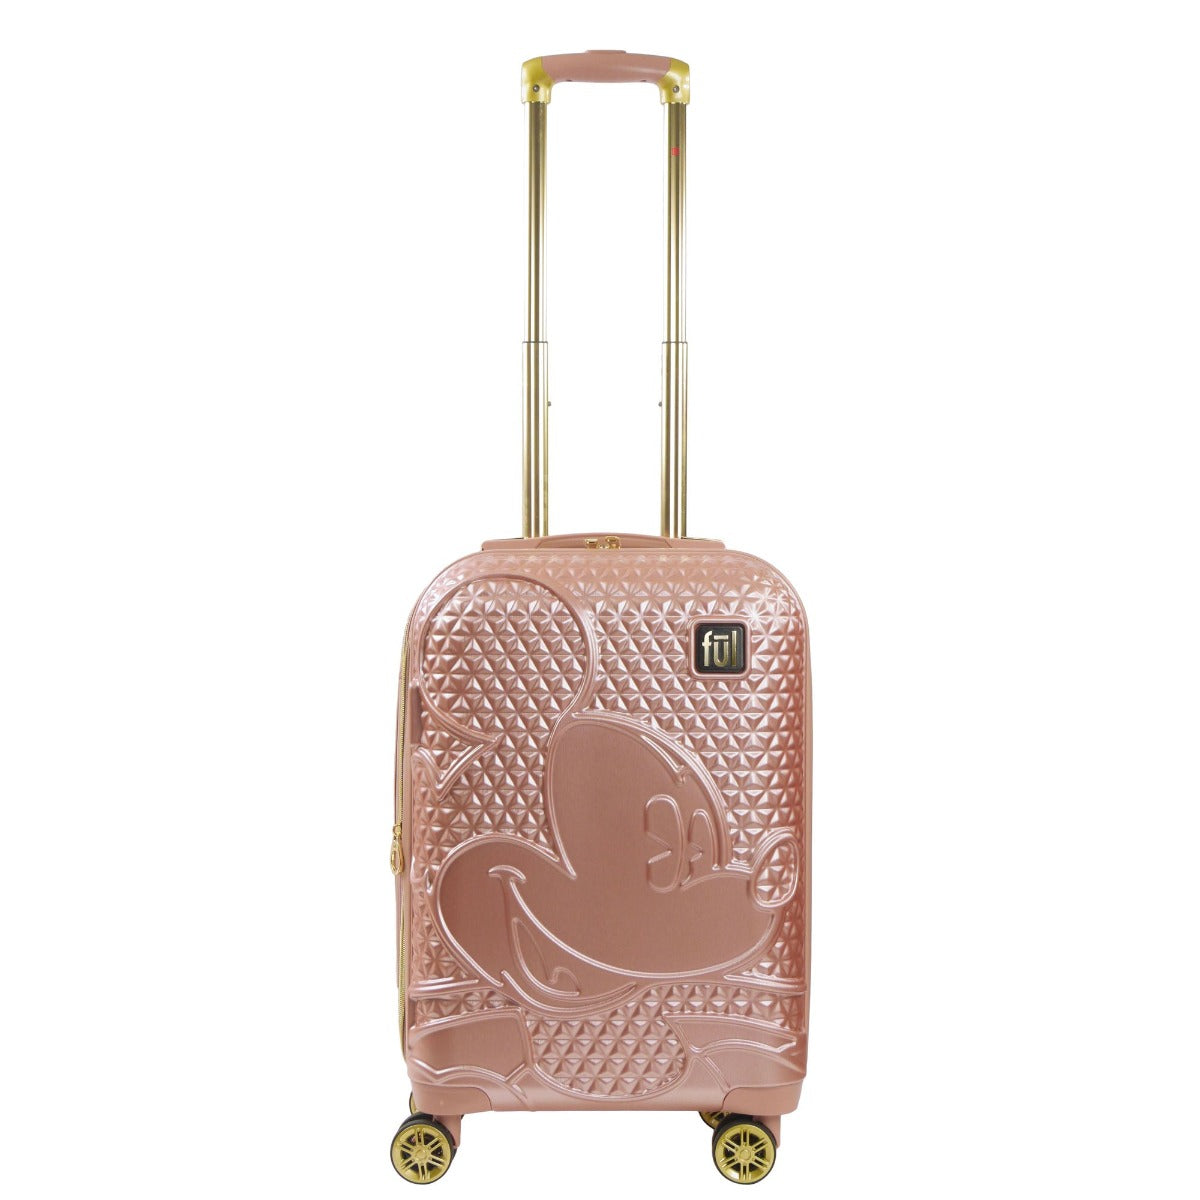 Rose gold Ful Disney Mickey Mouse 22.5 inch hardside spinner suitcase with 2 id tags - best carry-on luggage for traveling